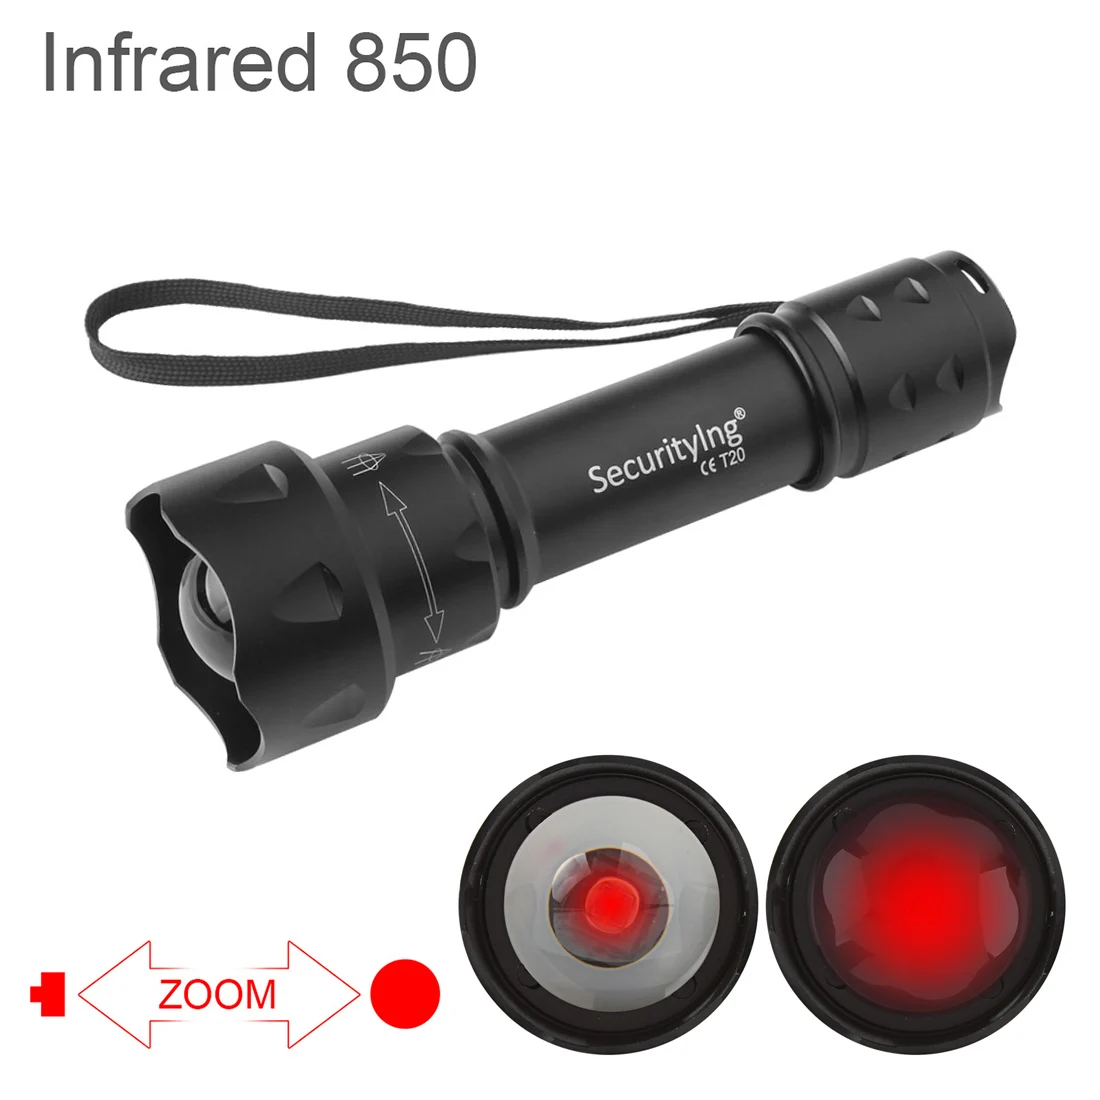 IR Night Vision Flashlight  T20 Infrared 850nm 1000 LM Radiation Tactical Flashlight 38mm Lens Zoomable LED Hunting Torch